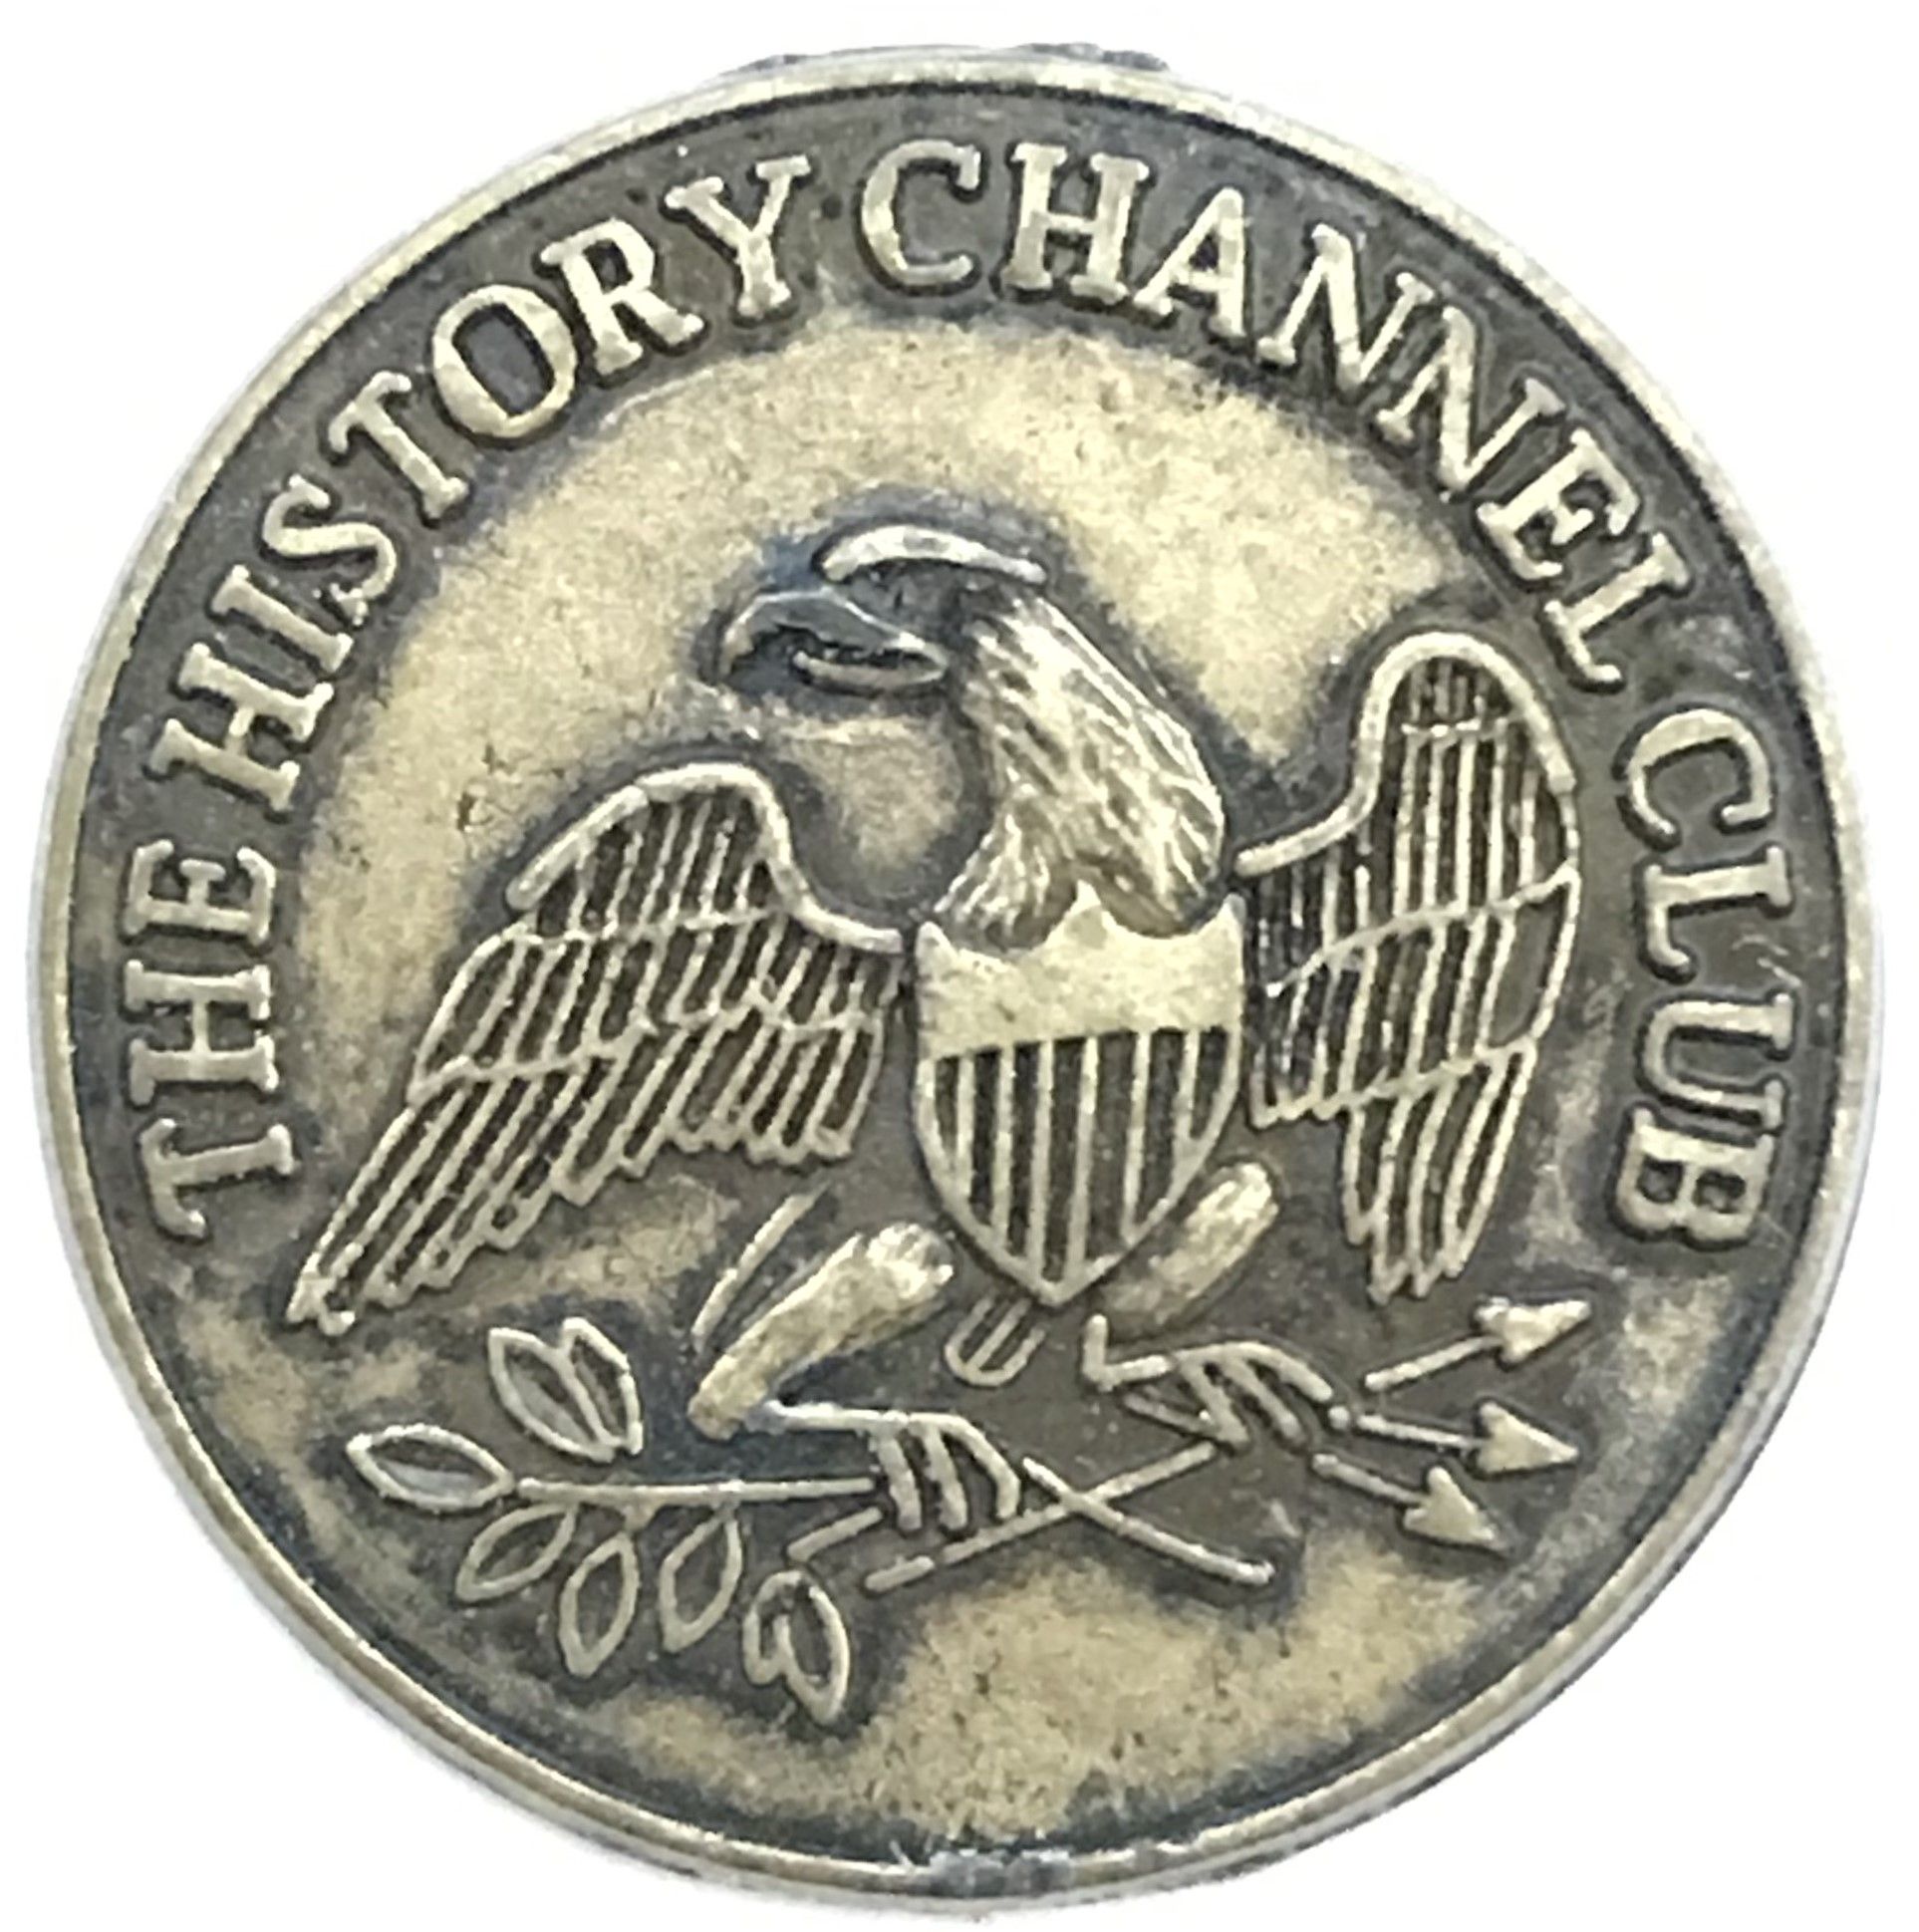 The History Channel Club token NIce - For Sale, Buy Now Online - Item #